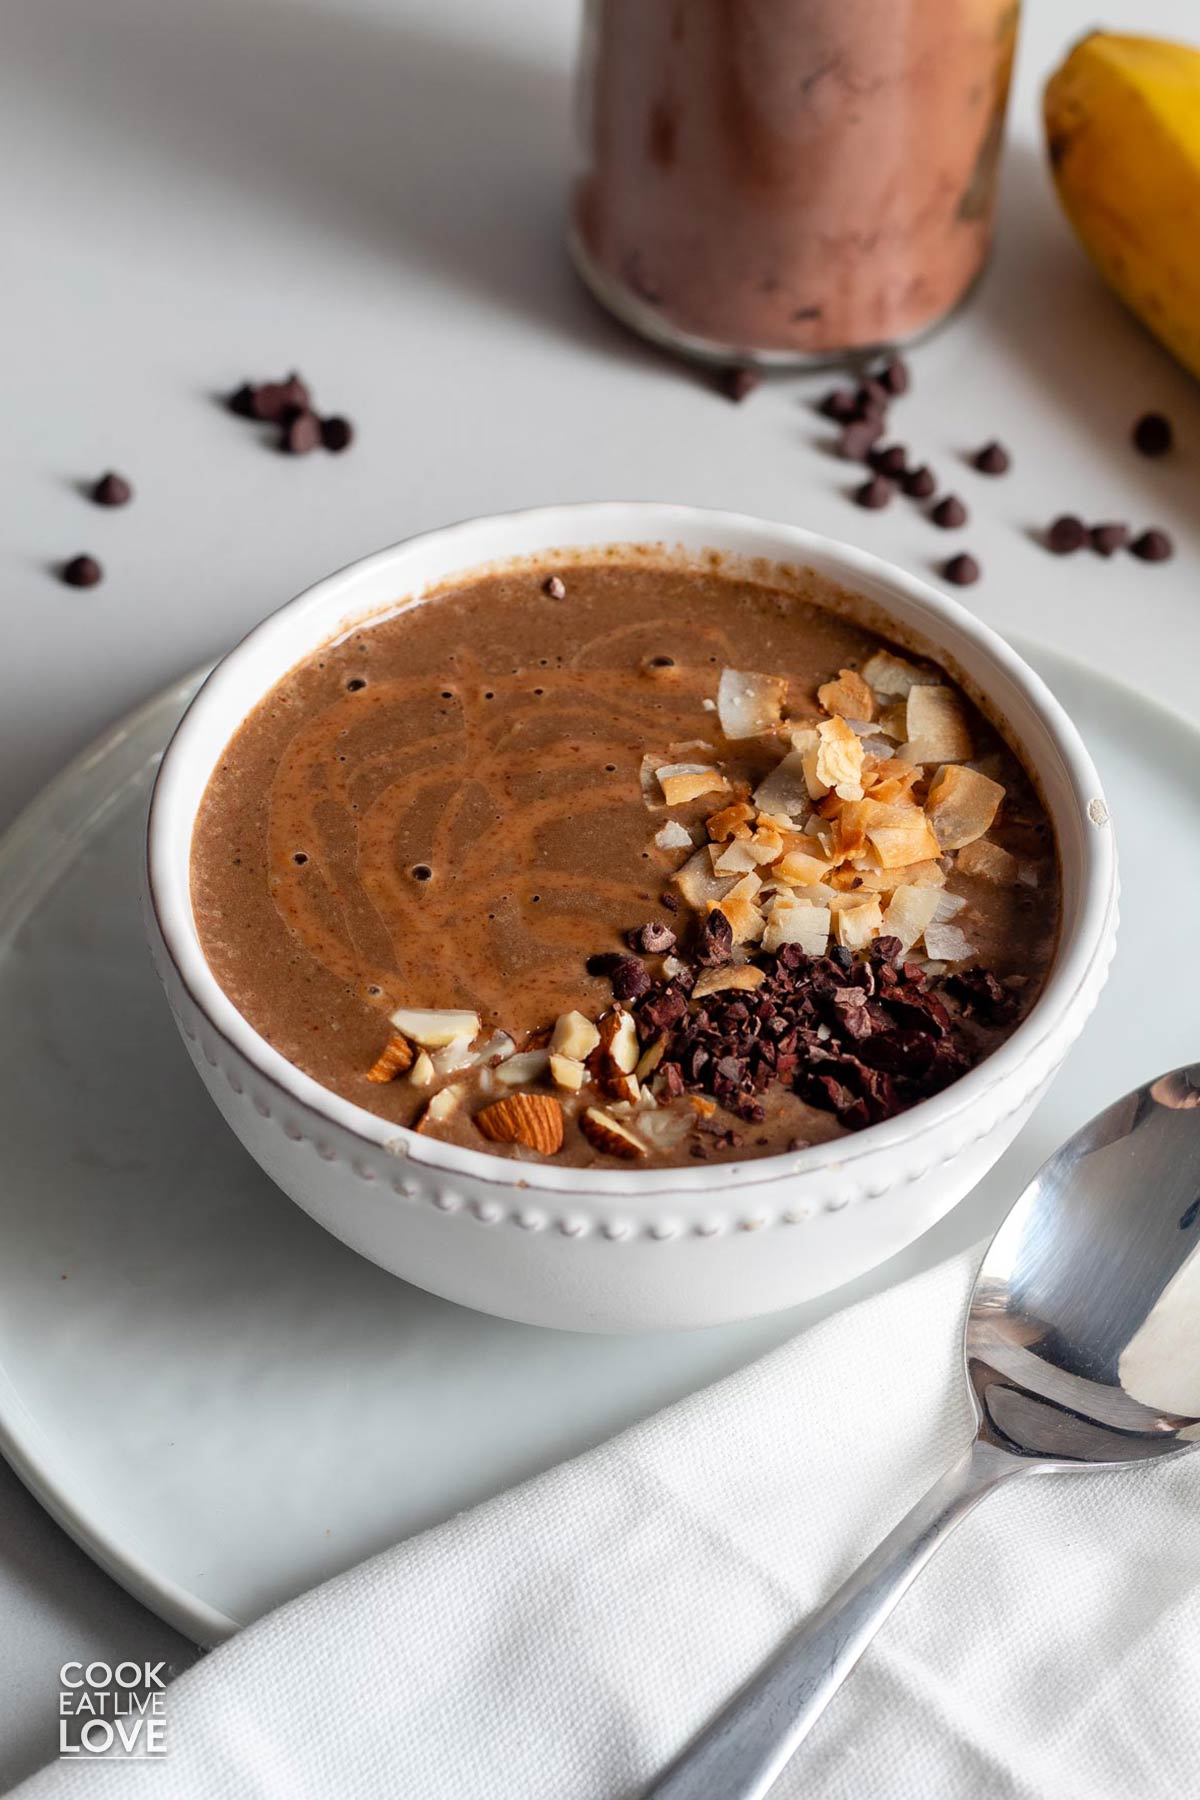 A chocolate smoothie bowl on the table drizzled with almond butter.